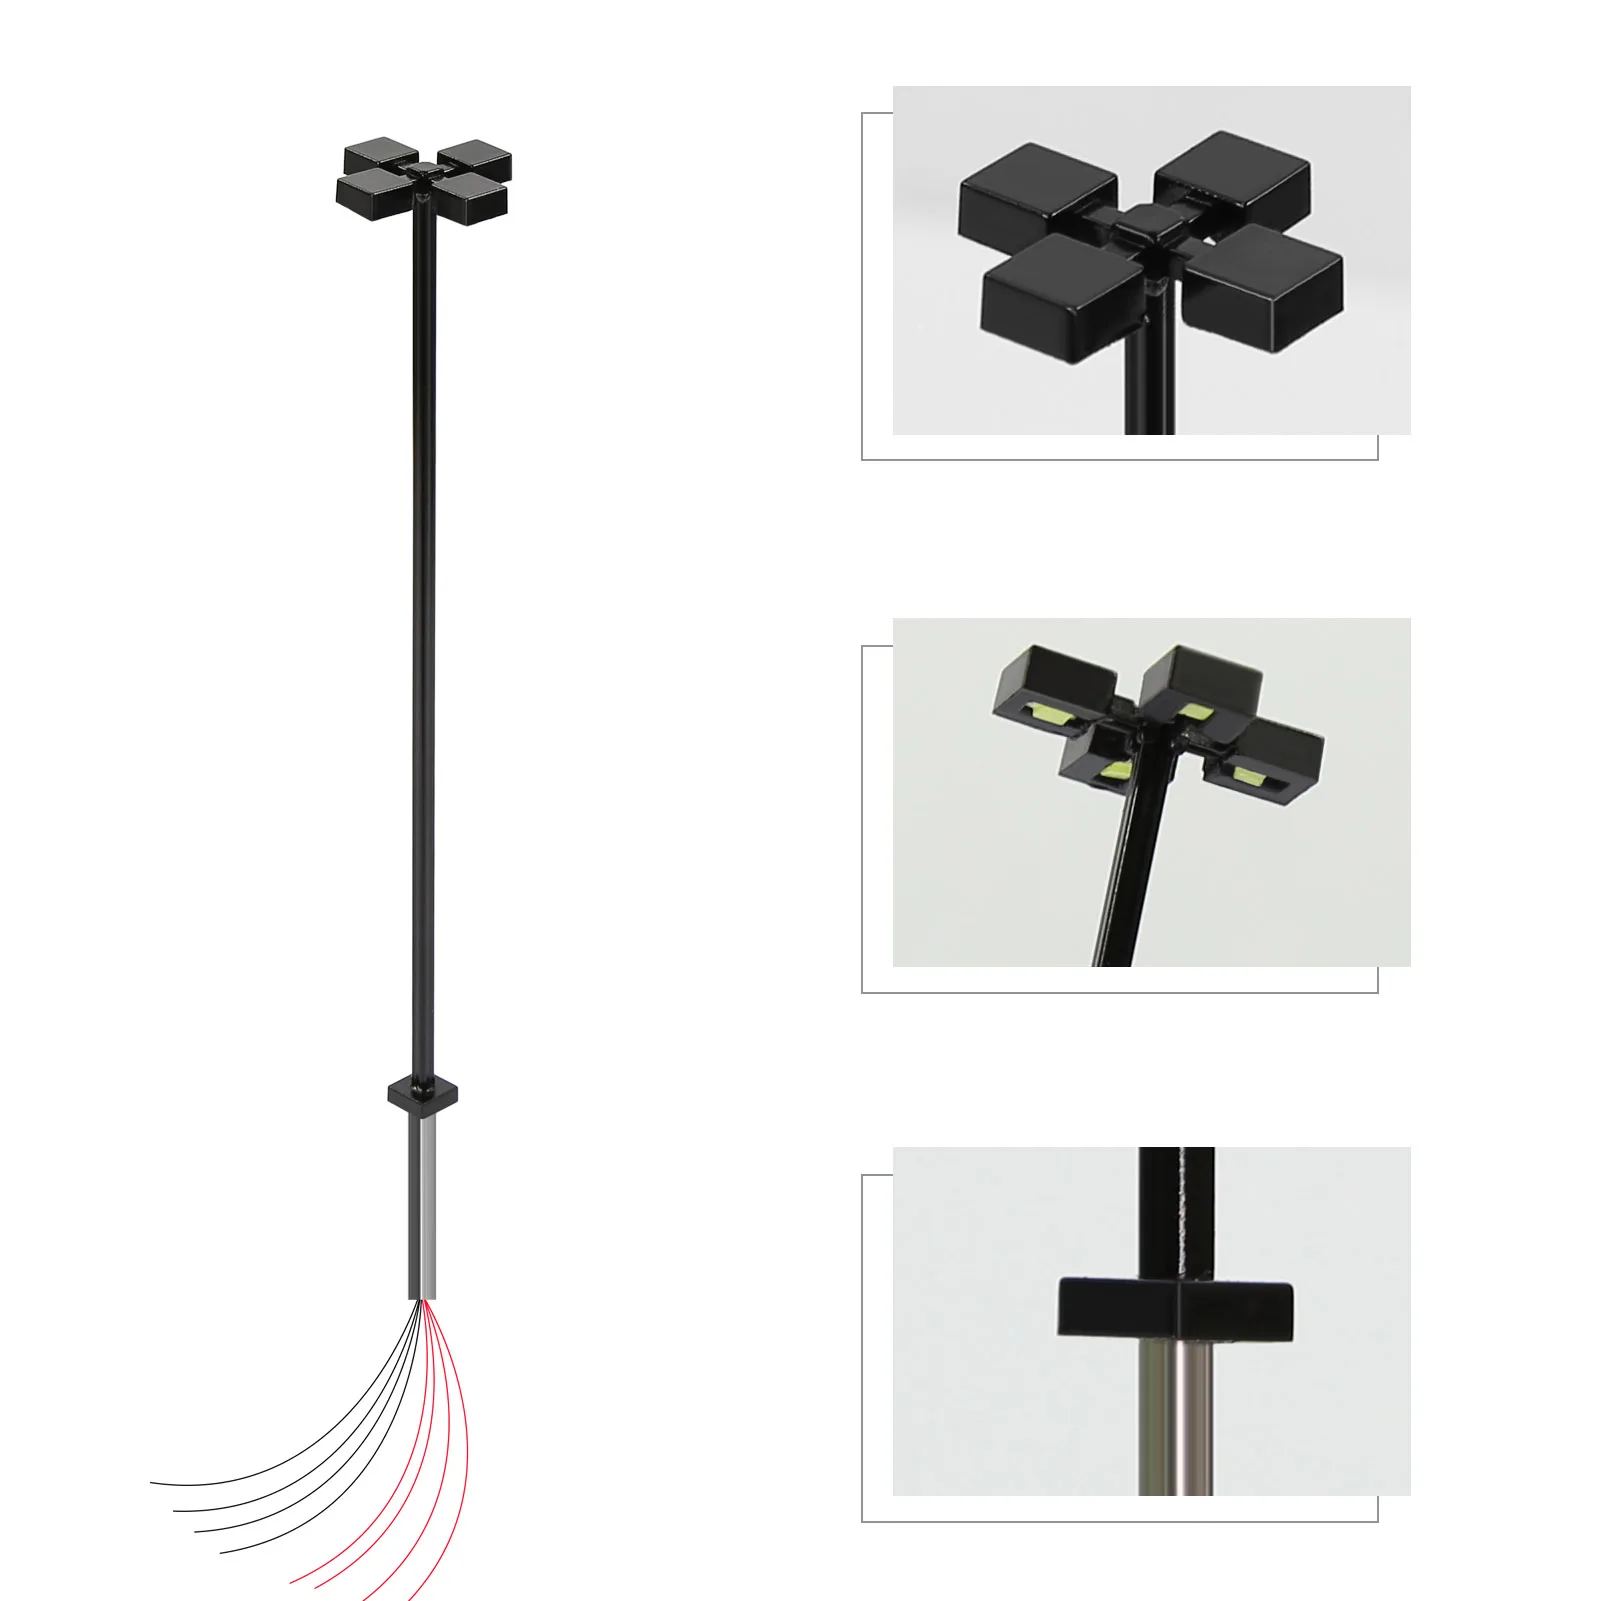 

LM06HOW Evemodel 10pcs HO OO Scale 1:75 Metal Lamp Bright White LED Four-Heads Street Lights 10.6cm Black Pole